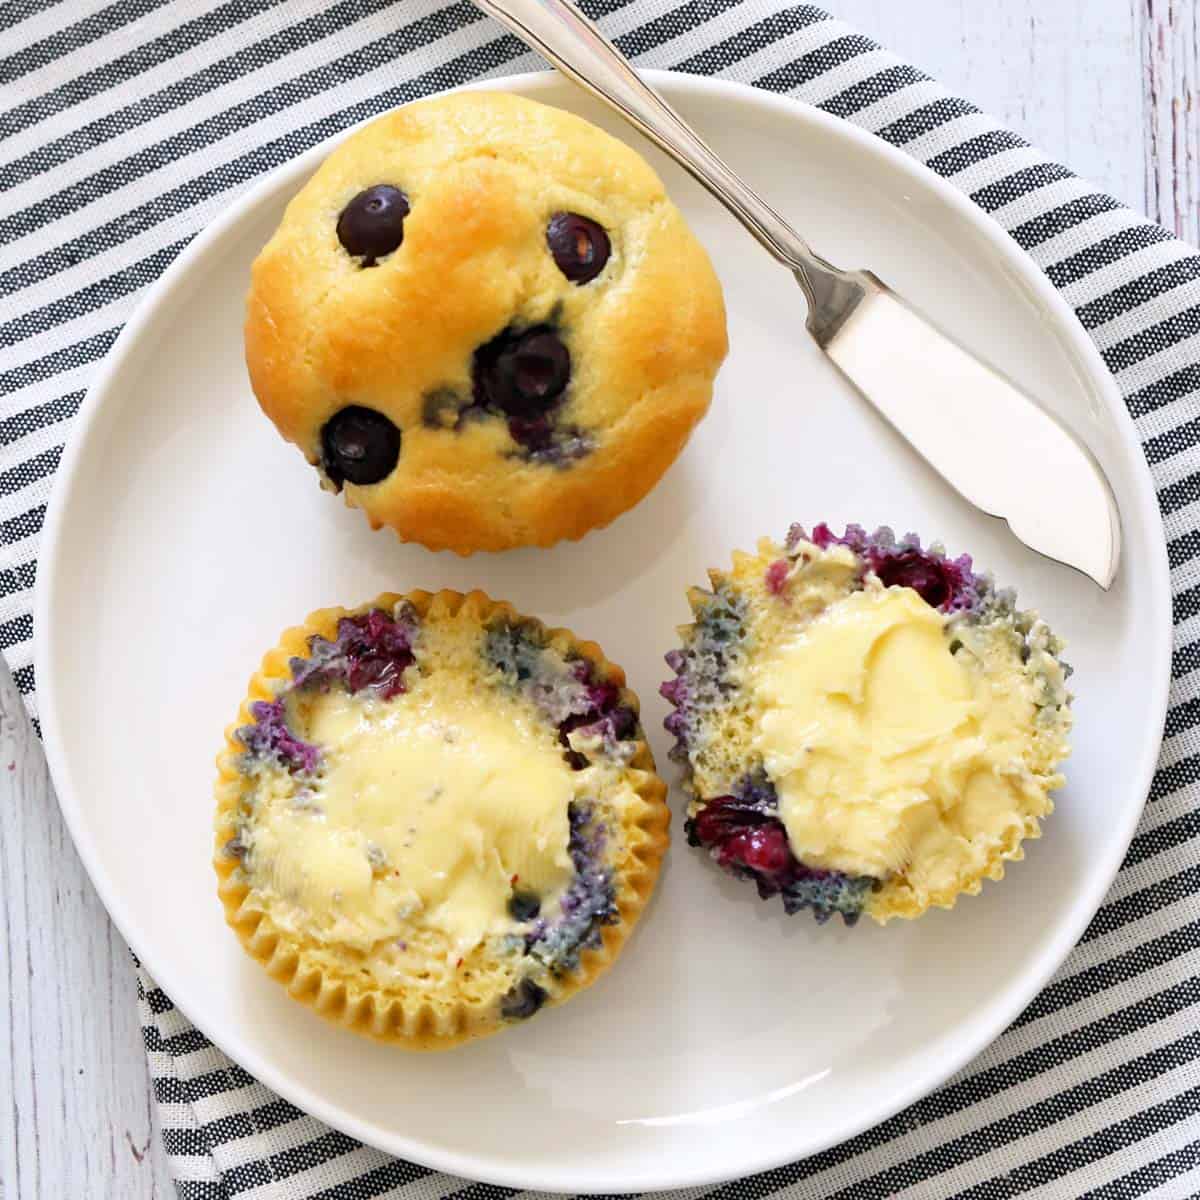 Topping keto blueberry muffins with butter.